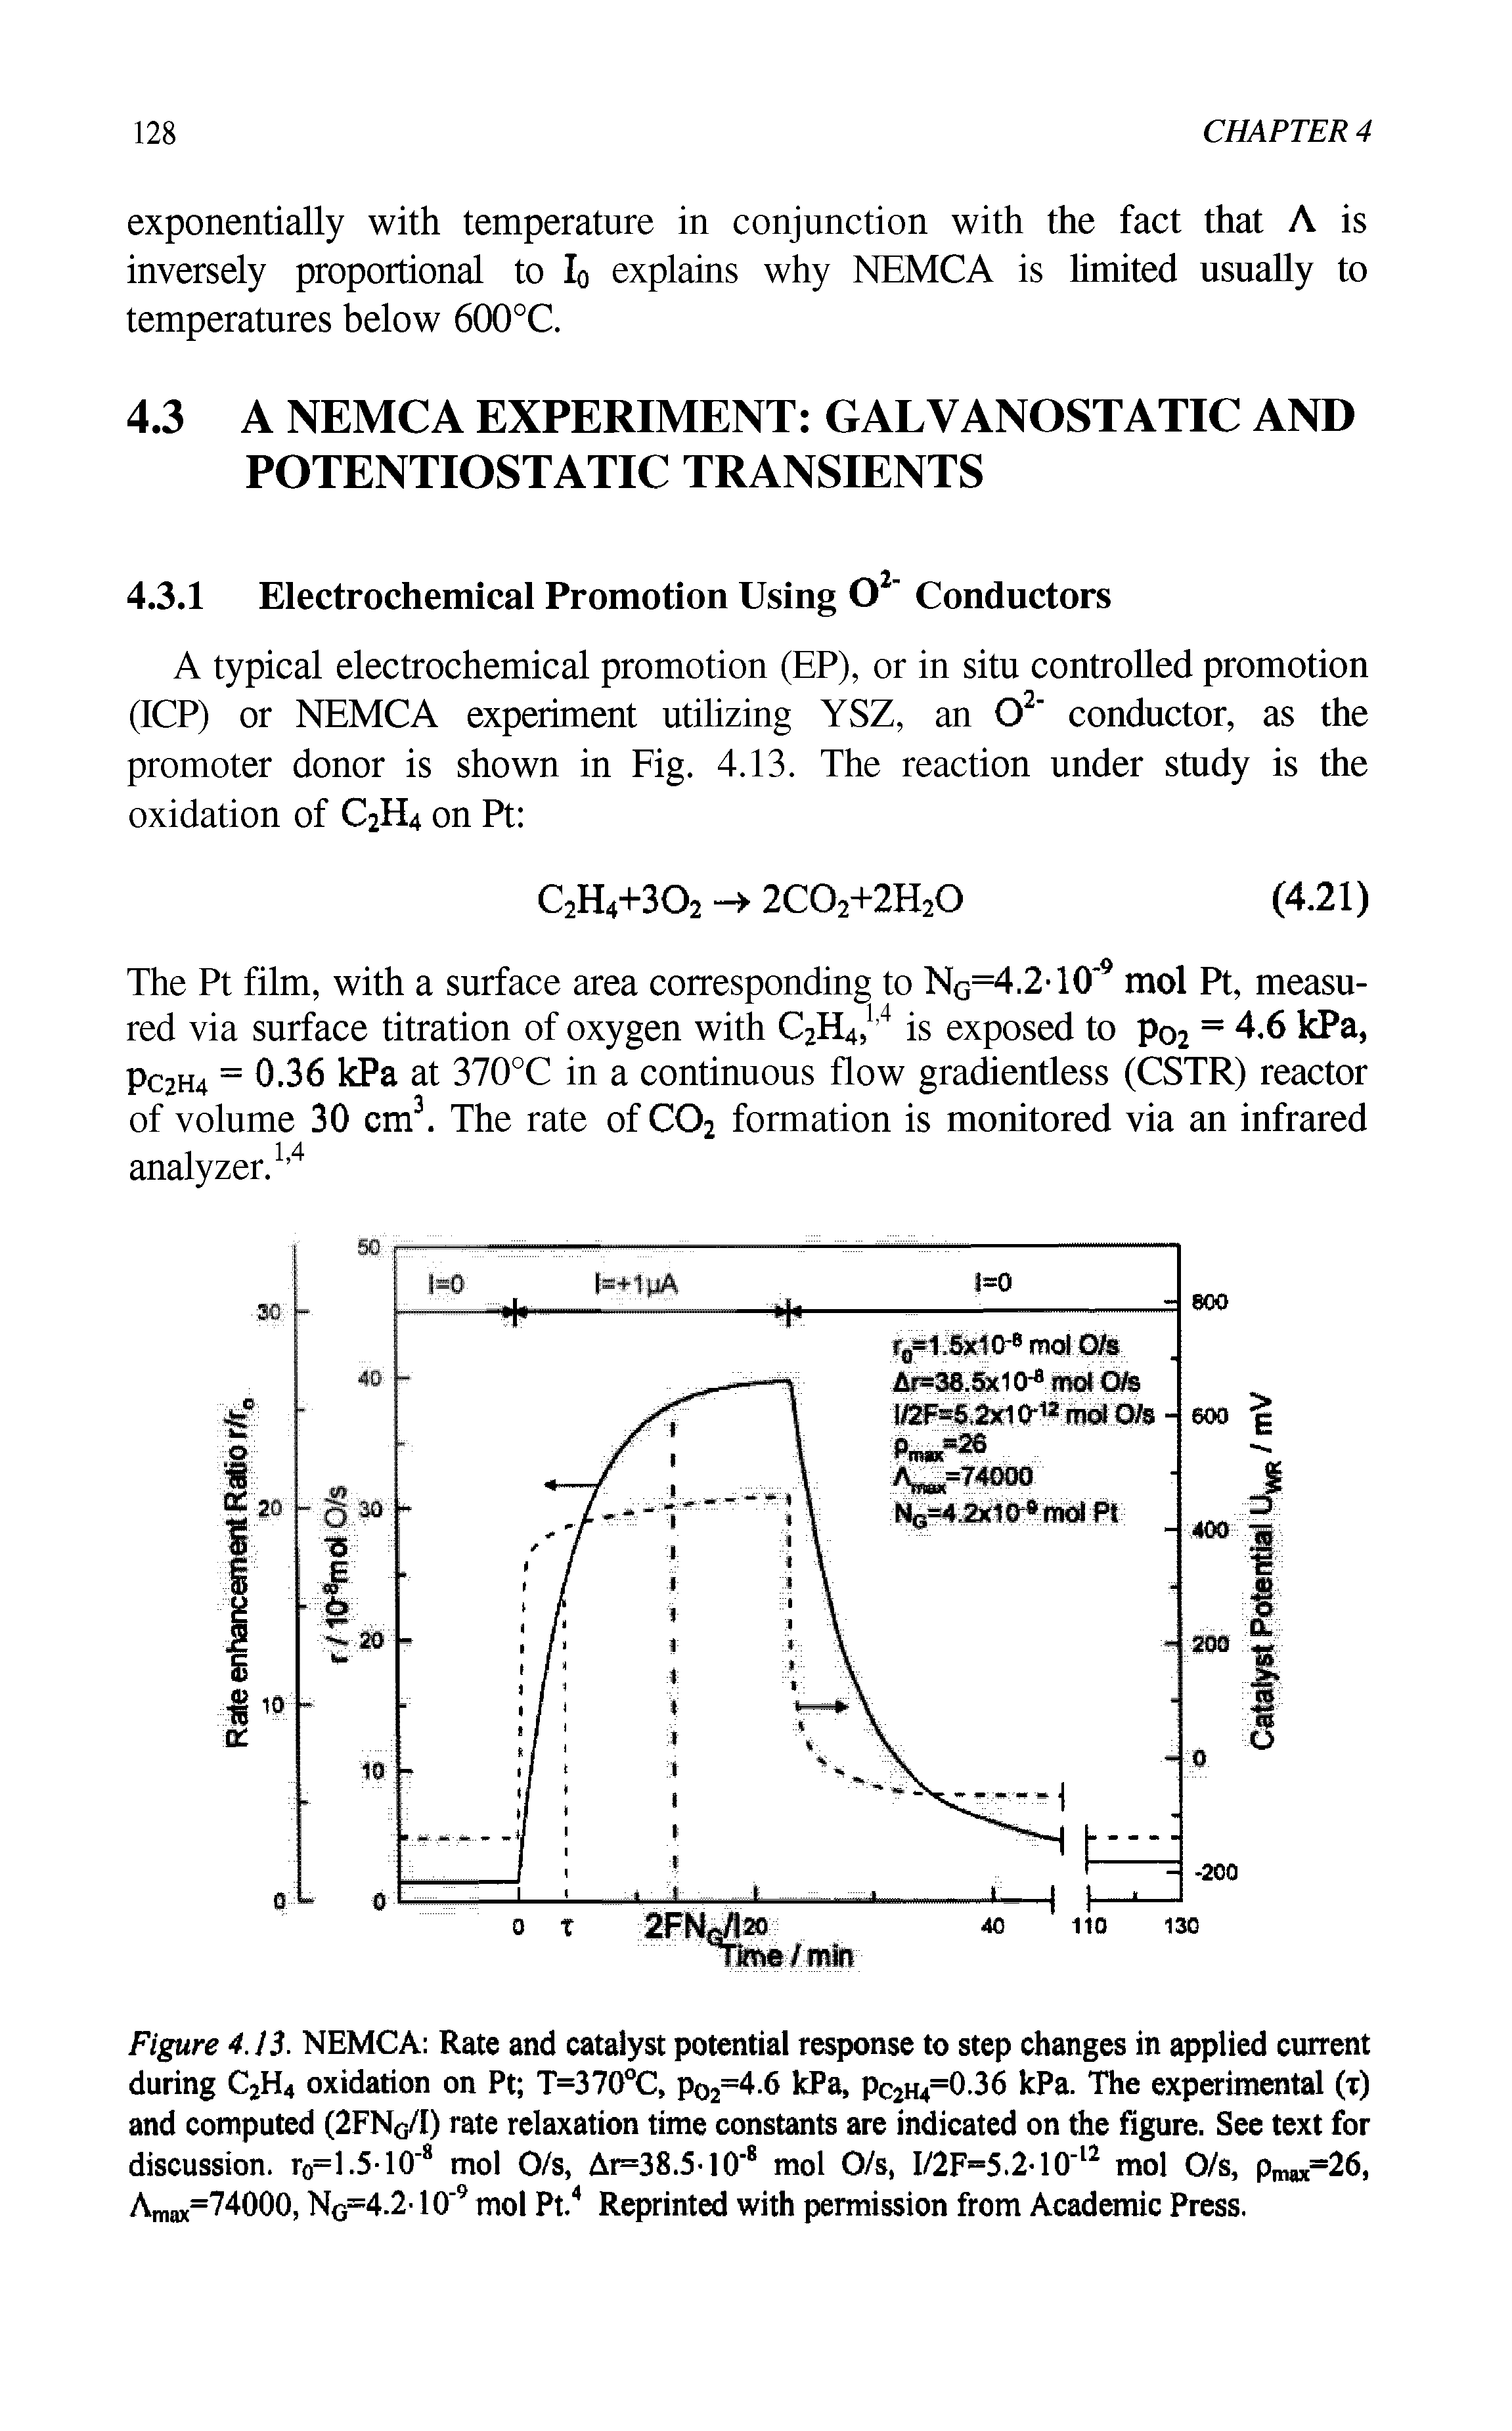 Figure 4.13. NEMCA Rate and catalyst potential response to step changes in applied current during C2H4 oxidation on Pt T=370°C, p02=4.6 kPa, Pc2h4=0.36 kPa. The experimental (t) and computed (2FNG/I) rate relaxation time constants are indicated on the figure. See text for discussion. ro=1.5-10 8 mol O/s, Ar=38.5-10 8 mol O/s, I/2F=5.2-10 12 mol O/s, pmax=26, Amax=74000, Ng=4.240 9 mol Pt.4 Reprinted with permission from Academic Press.